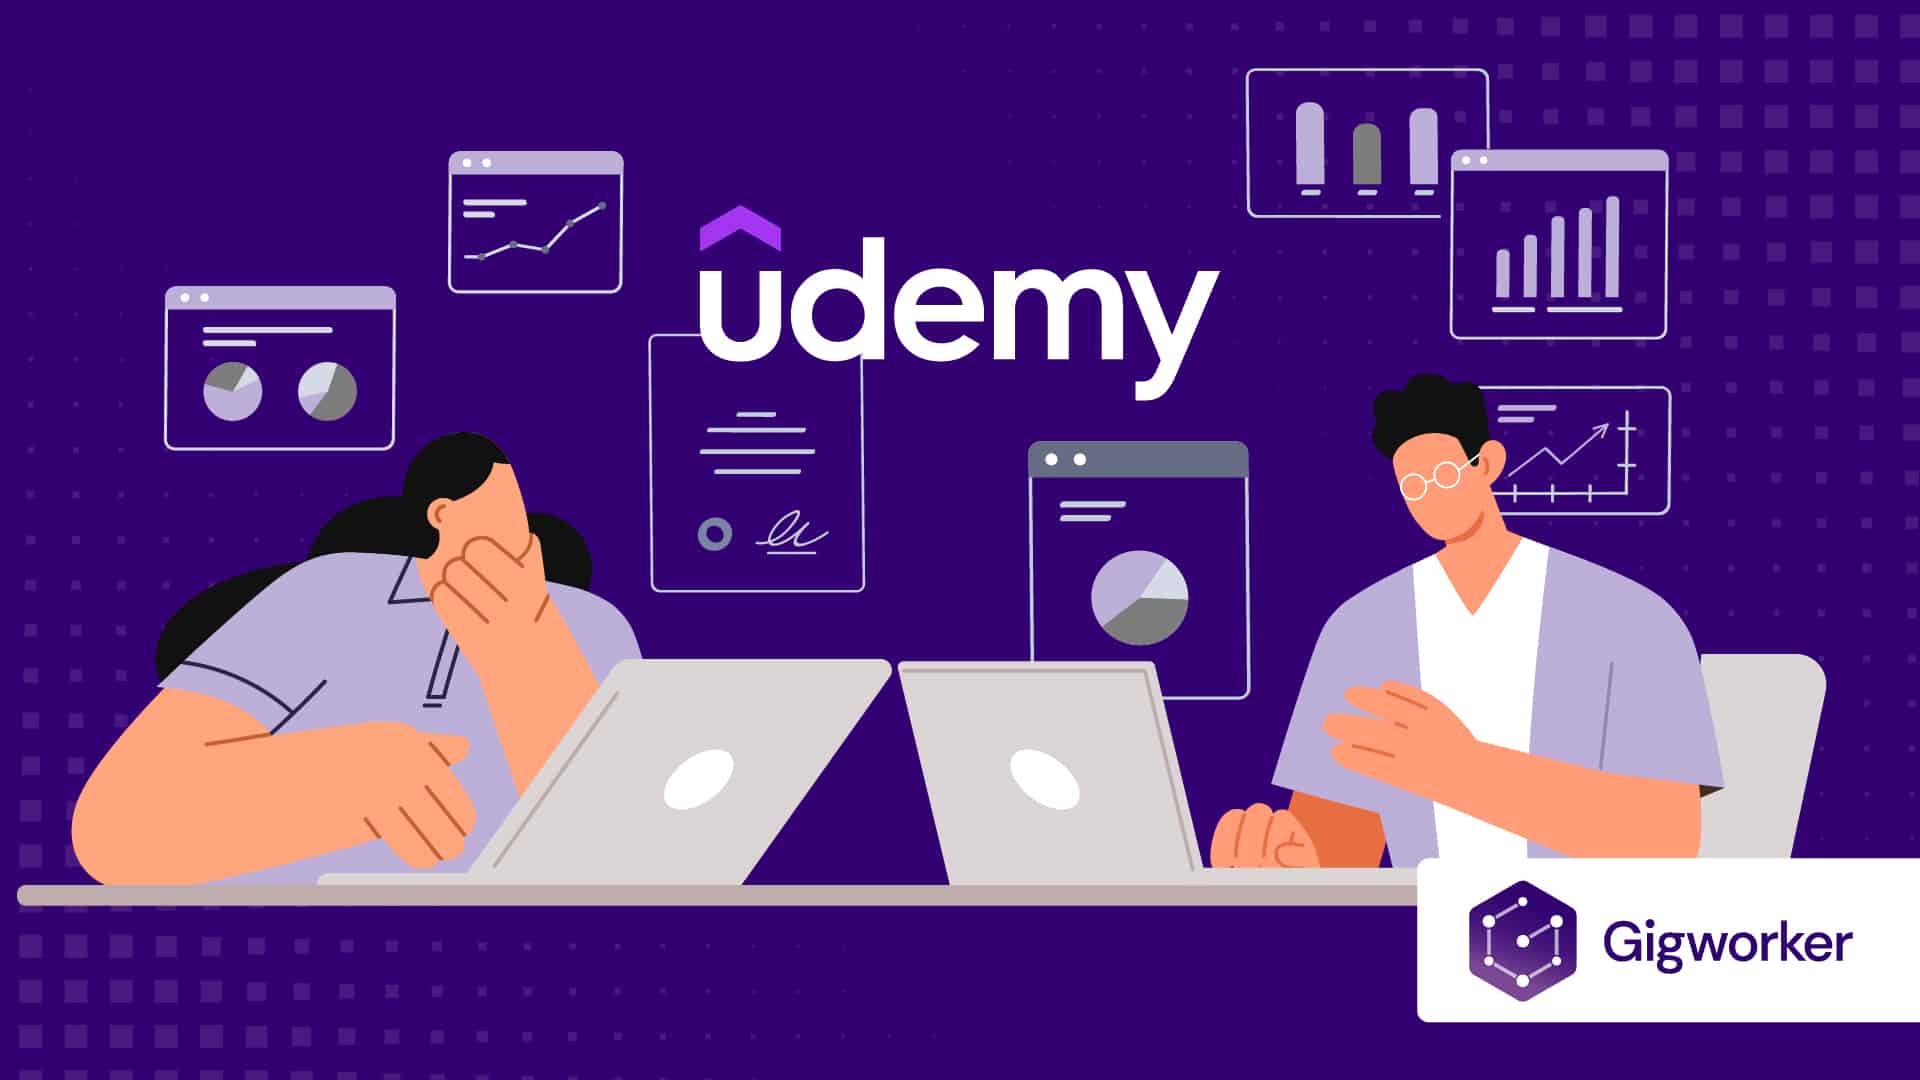 vector graphic showing an illustration of people learning how to make a udemy course